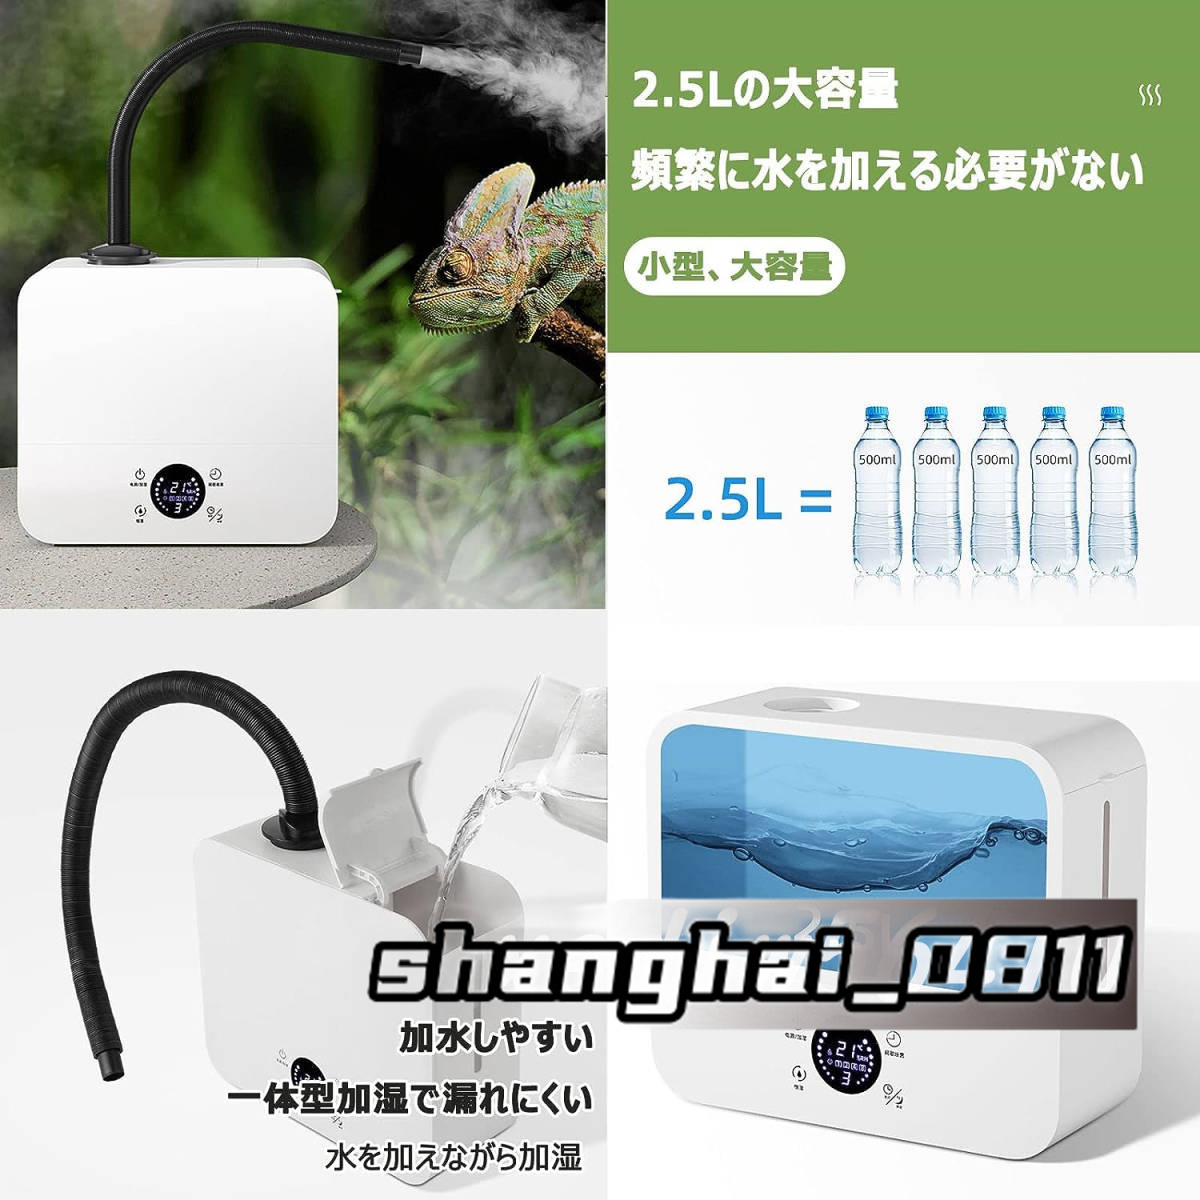  reptiles humidifier plant for humidifier desk / ornament 2.5L high capacity remote control attaching humidity 40-90% adjustment amphibia for automatic sprayer reptiles for Mist system foglamp machine 